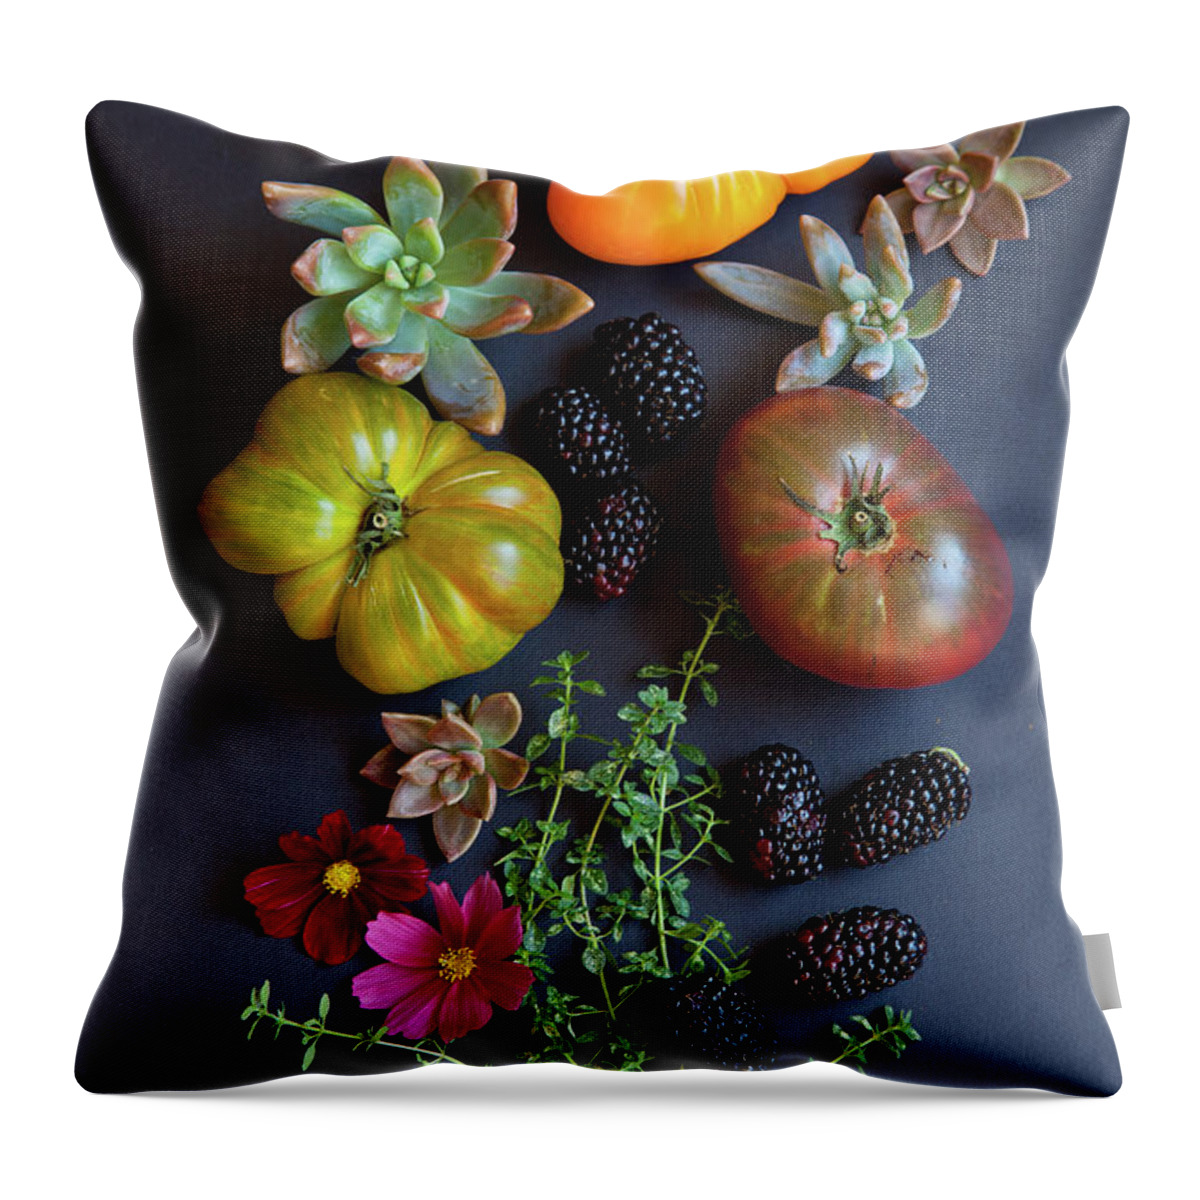 Foothill Ranch Throw Pillow featuring the photograph Heirloom Tomatoes With Herbs, Berries by Beth D. Yeaw